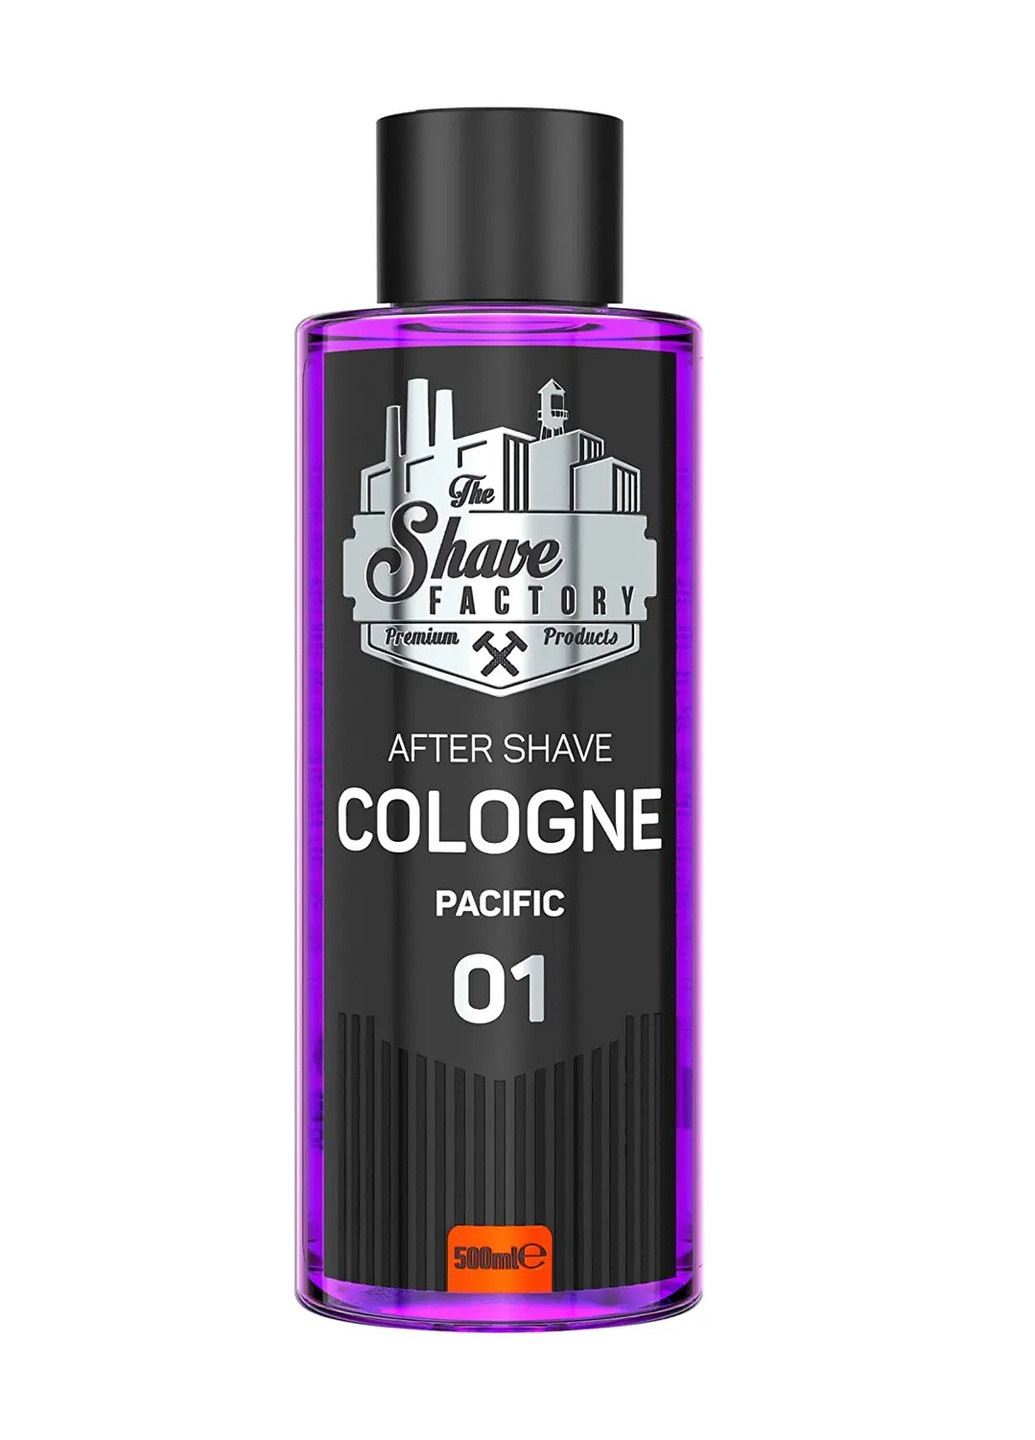 Одеколон после бритья After Shave Cologne Nr.1 Pacific 500 мл The Shave Factory (257863087)